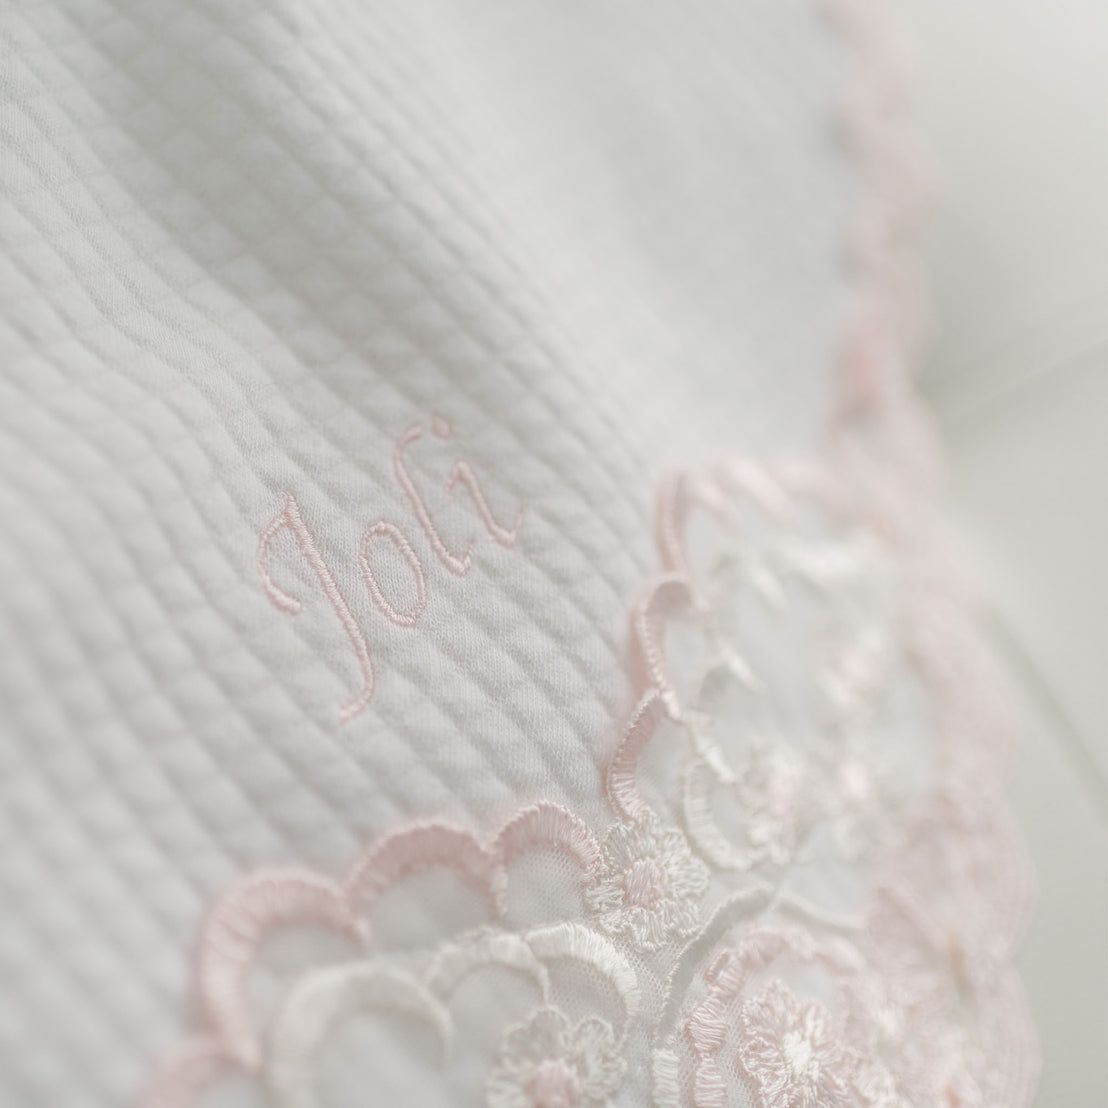 A close-up photo of a Joli Personalized Blanket with the embroidered name "Joli" in pink thread, partially overlaying an intricate white and pink lace design.